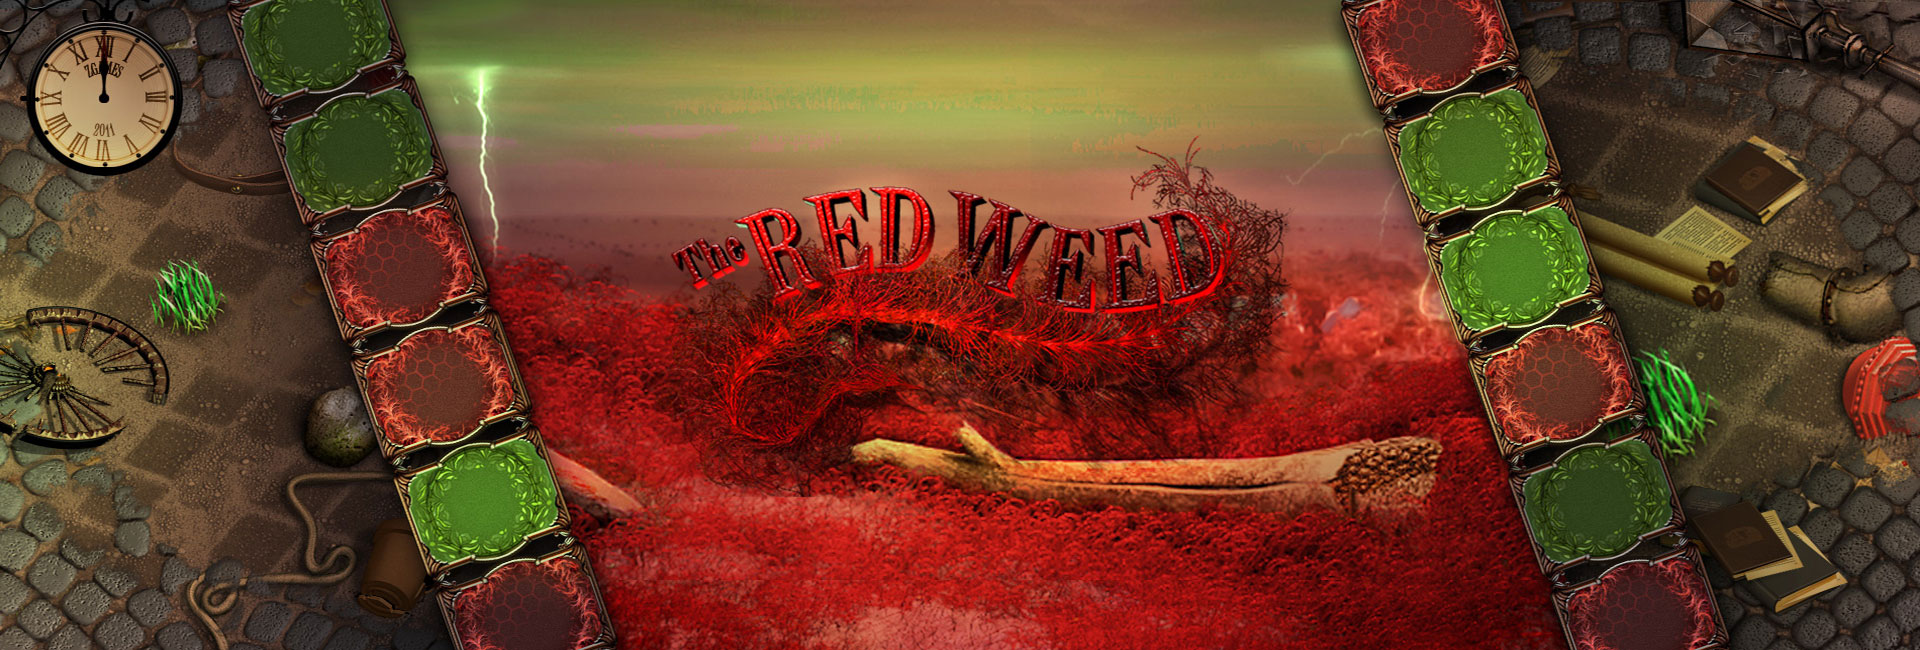 The Red Weed